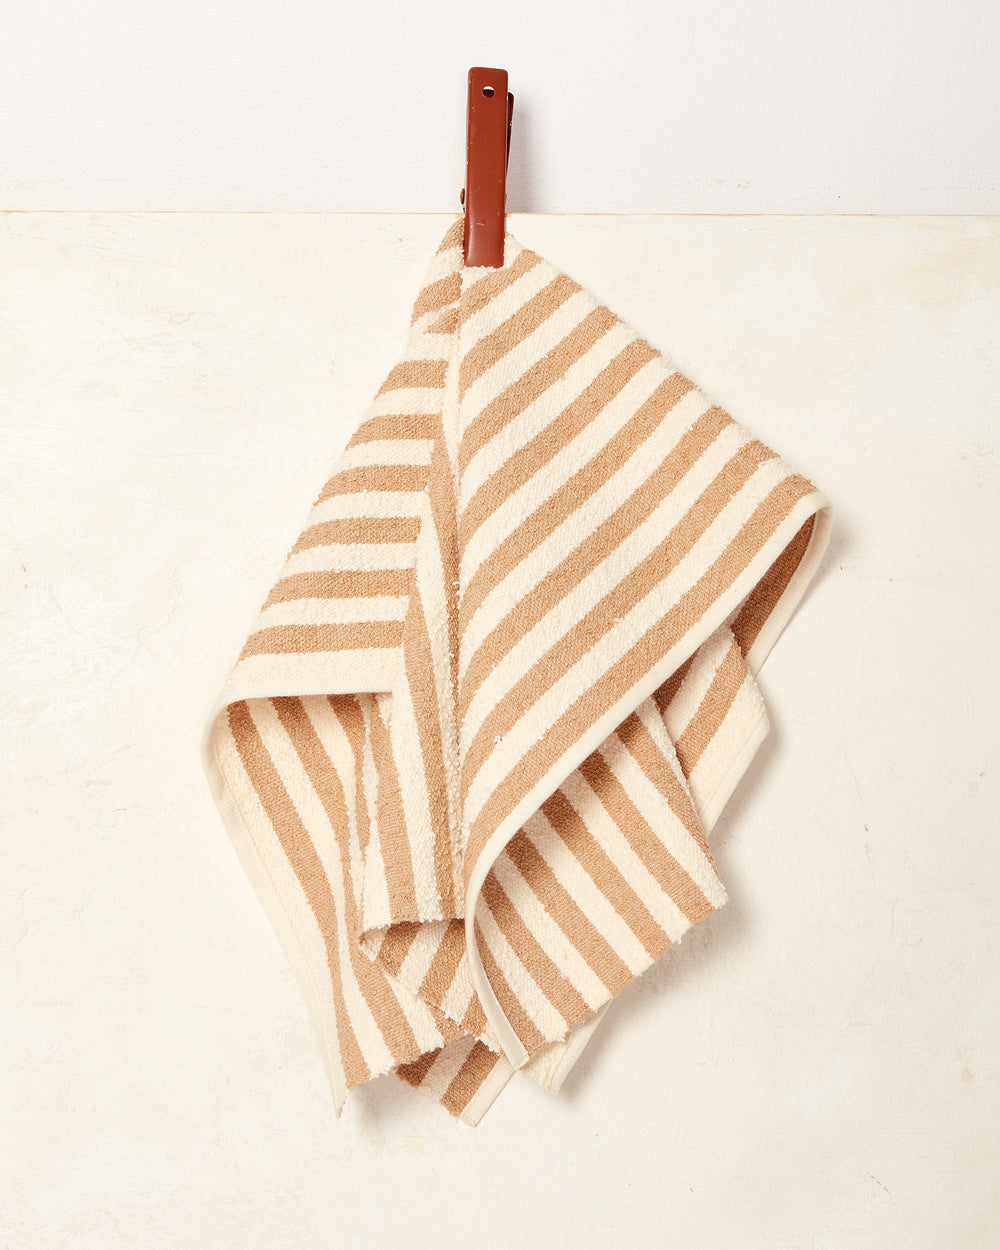 Handwoven Kitchen Textiles - Ethical & Sustainable Home Decor